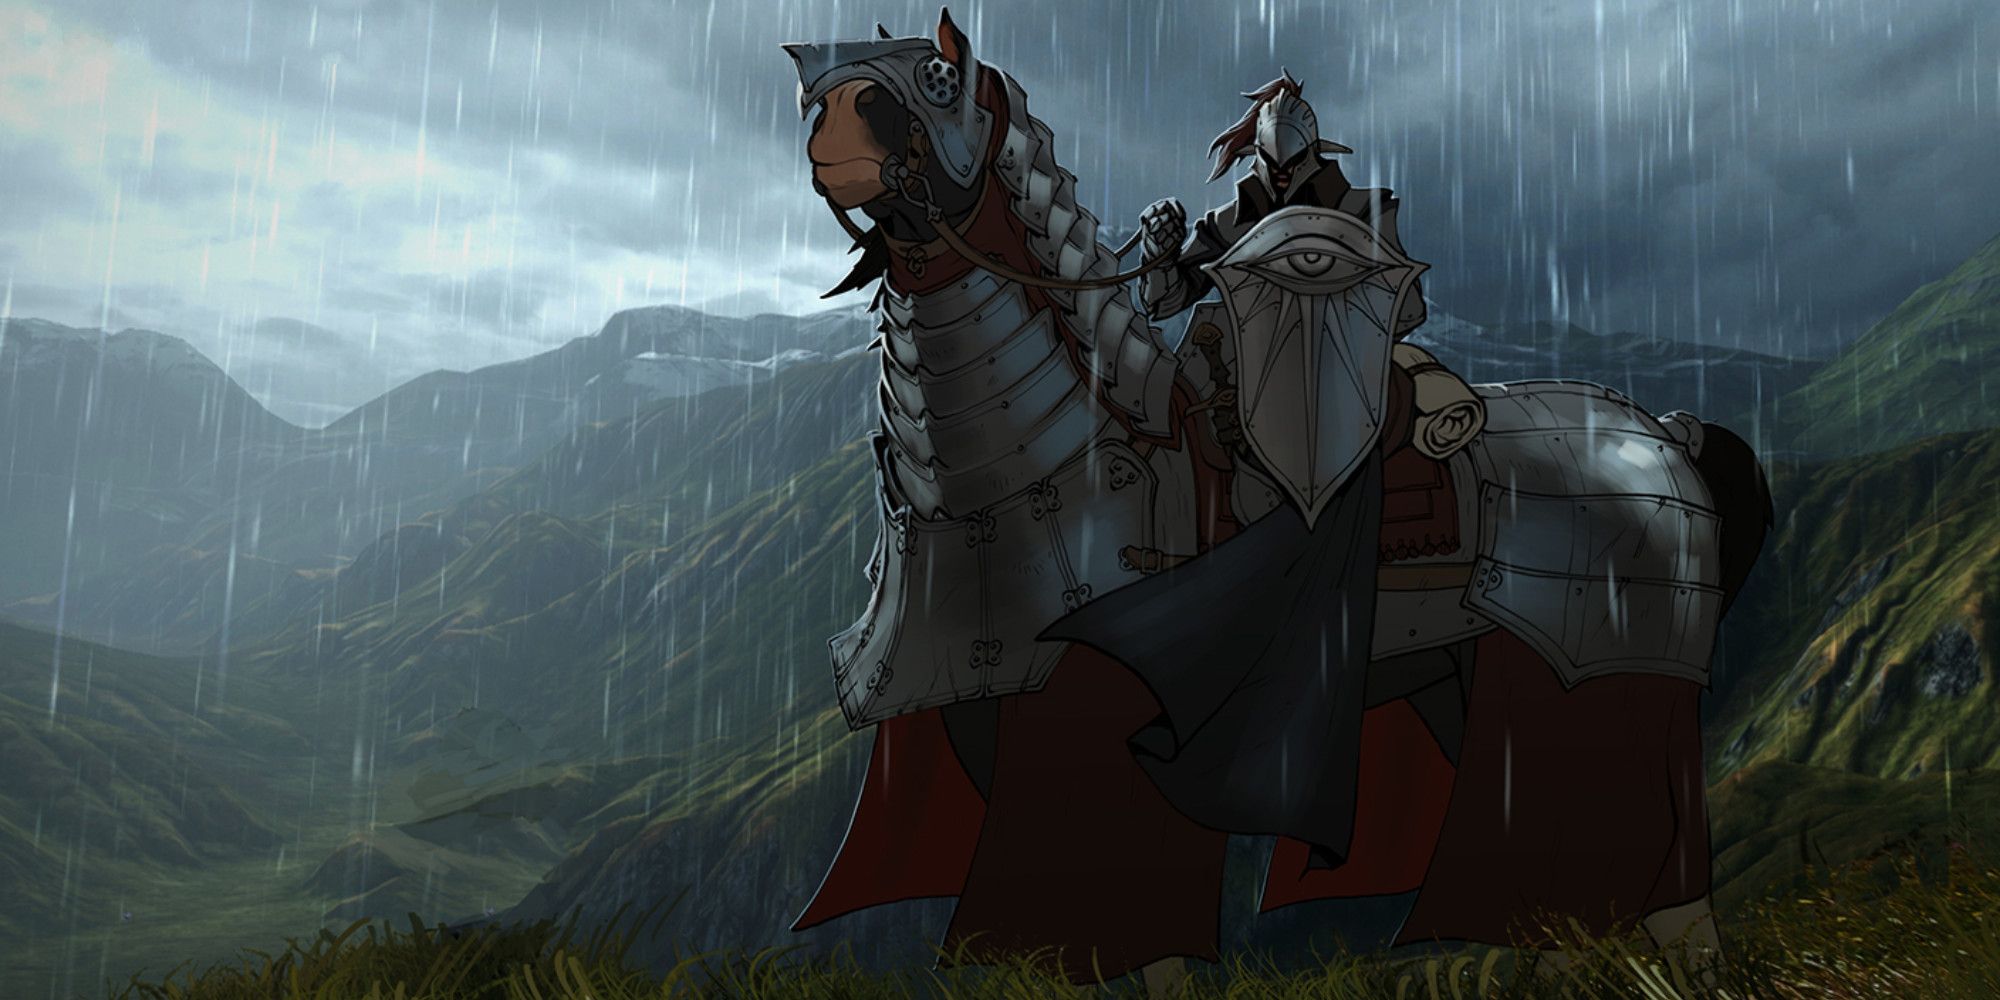 Dragon Age knight on a horse